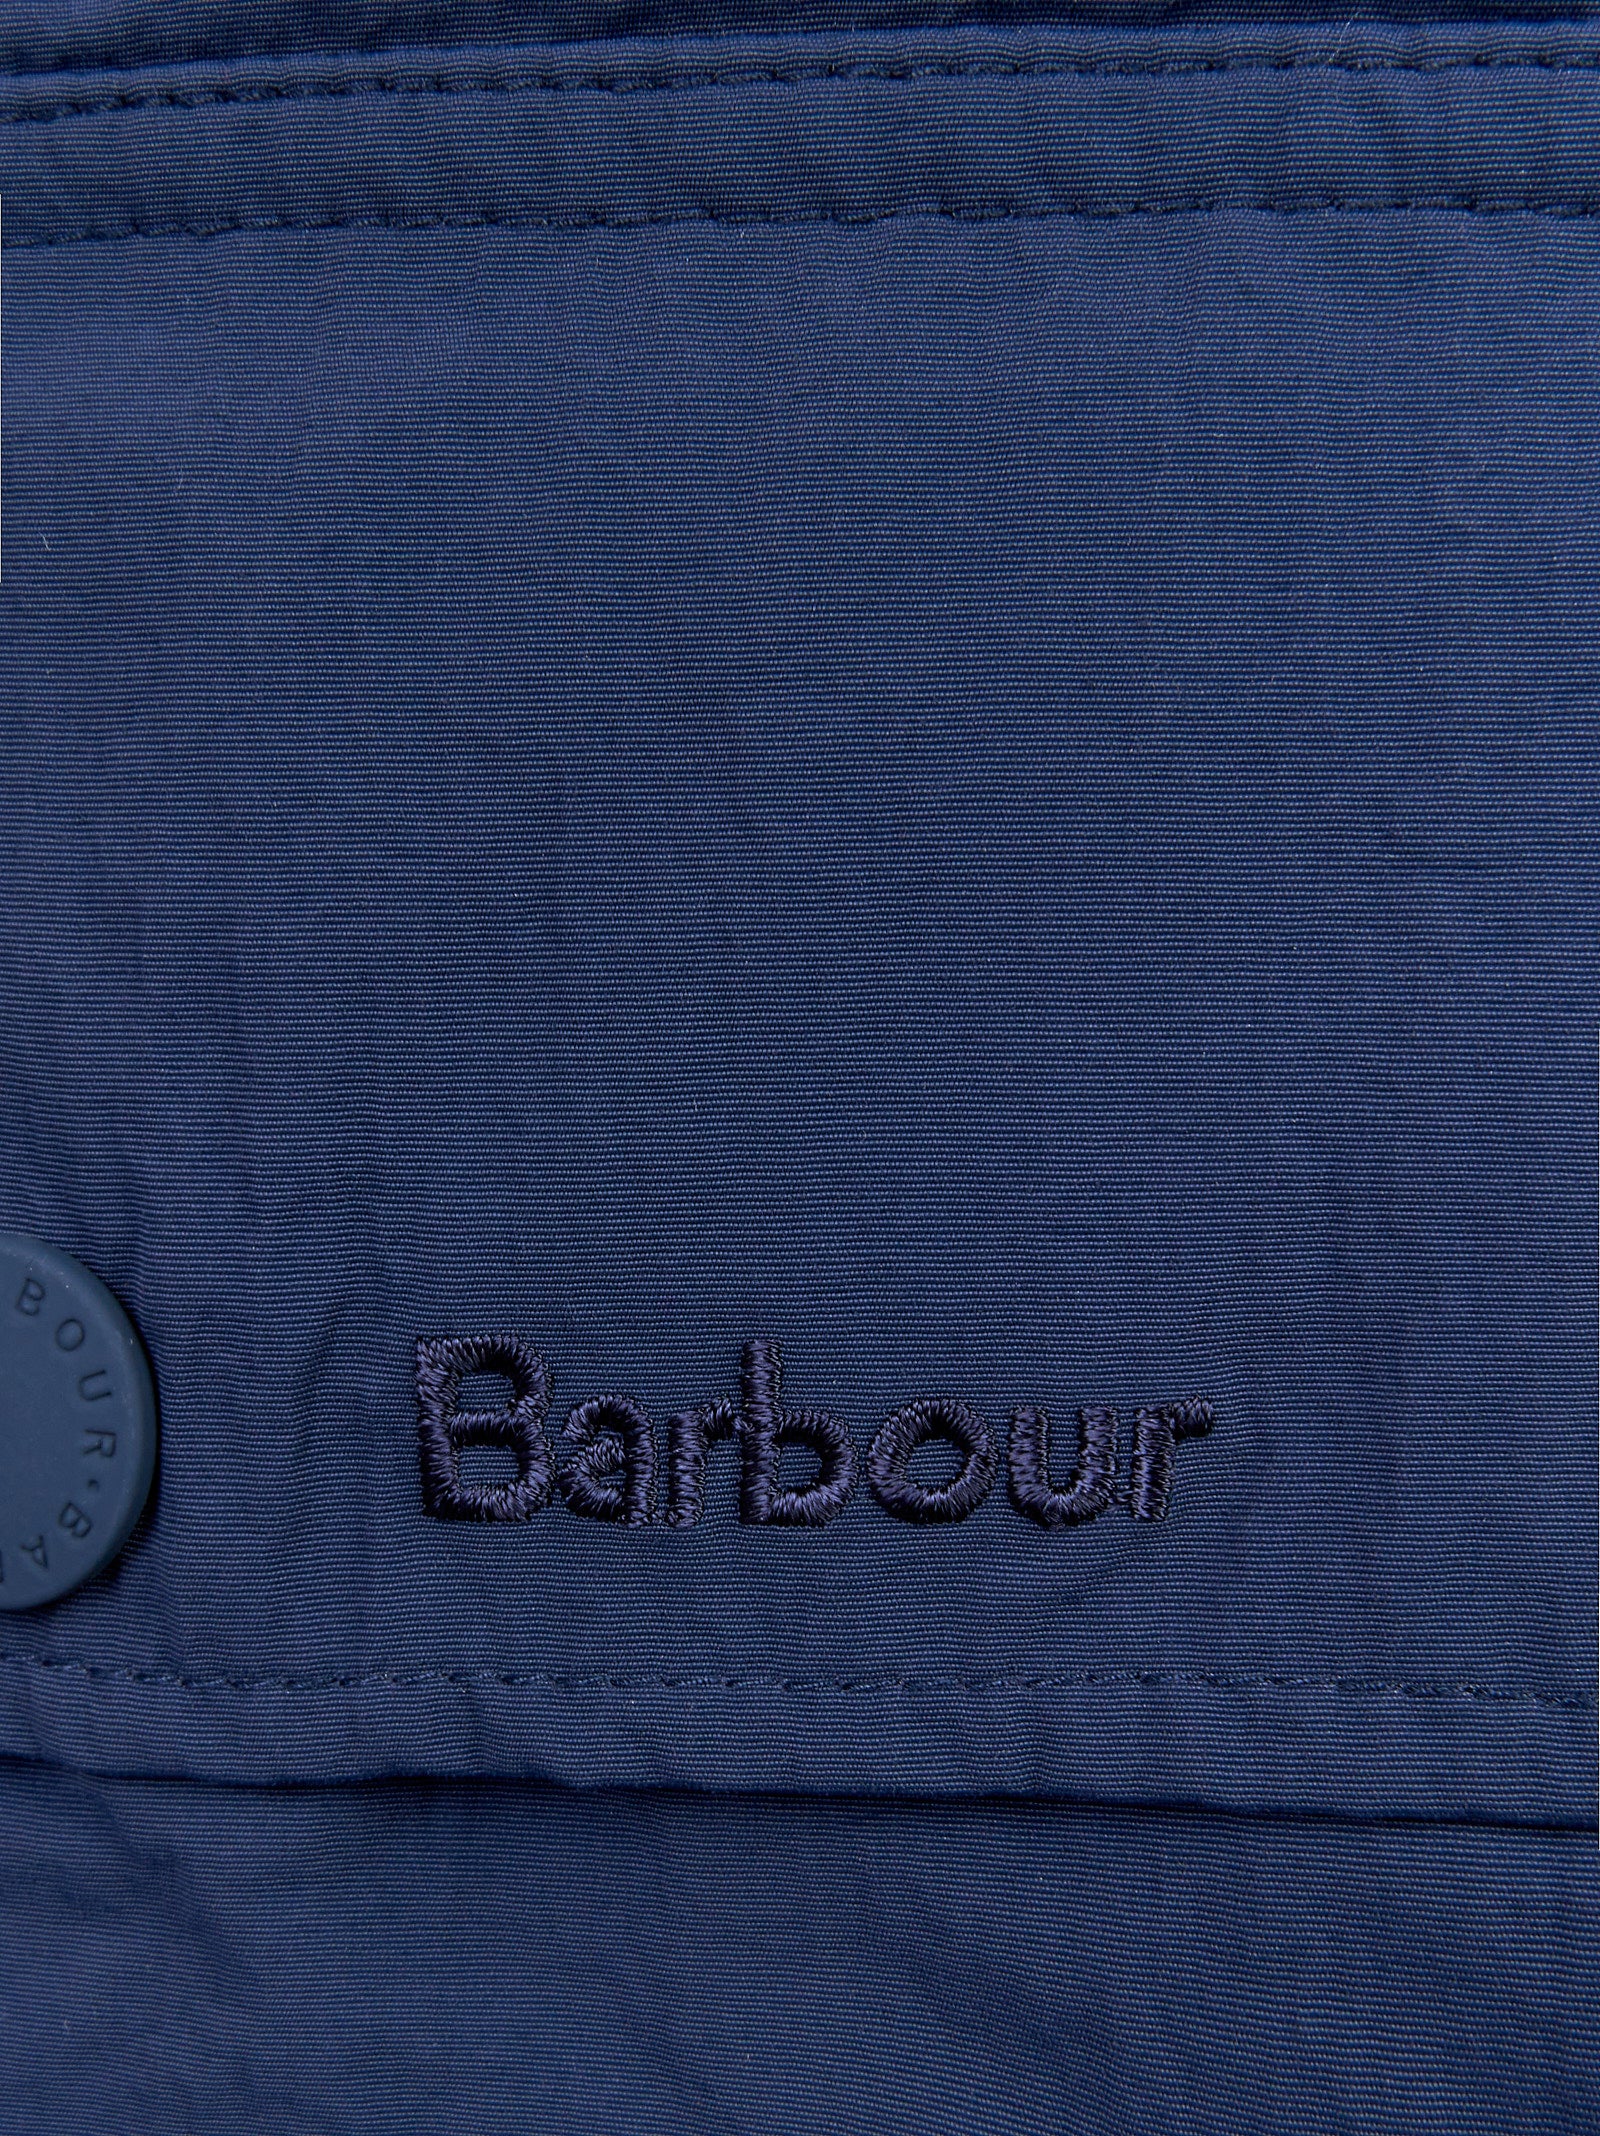 Giubbotto BARBOUR Ashby
Navy